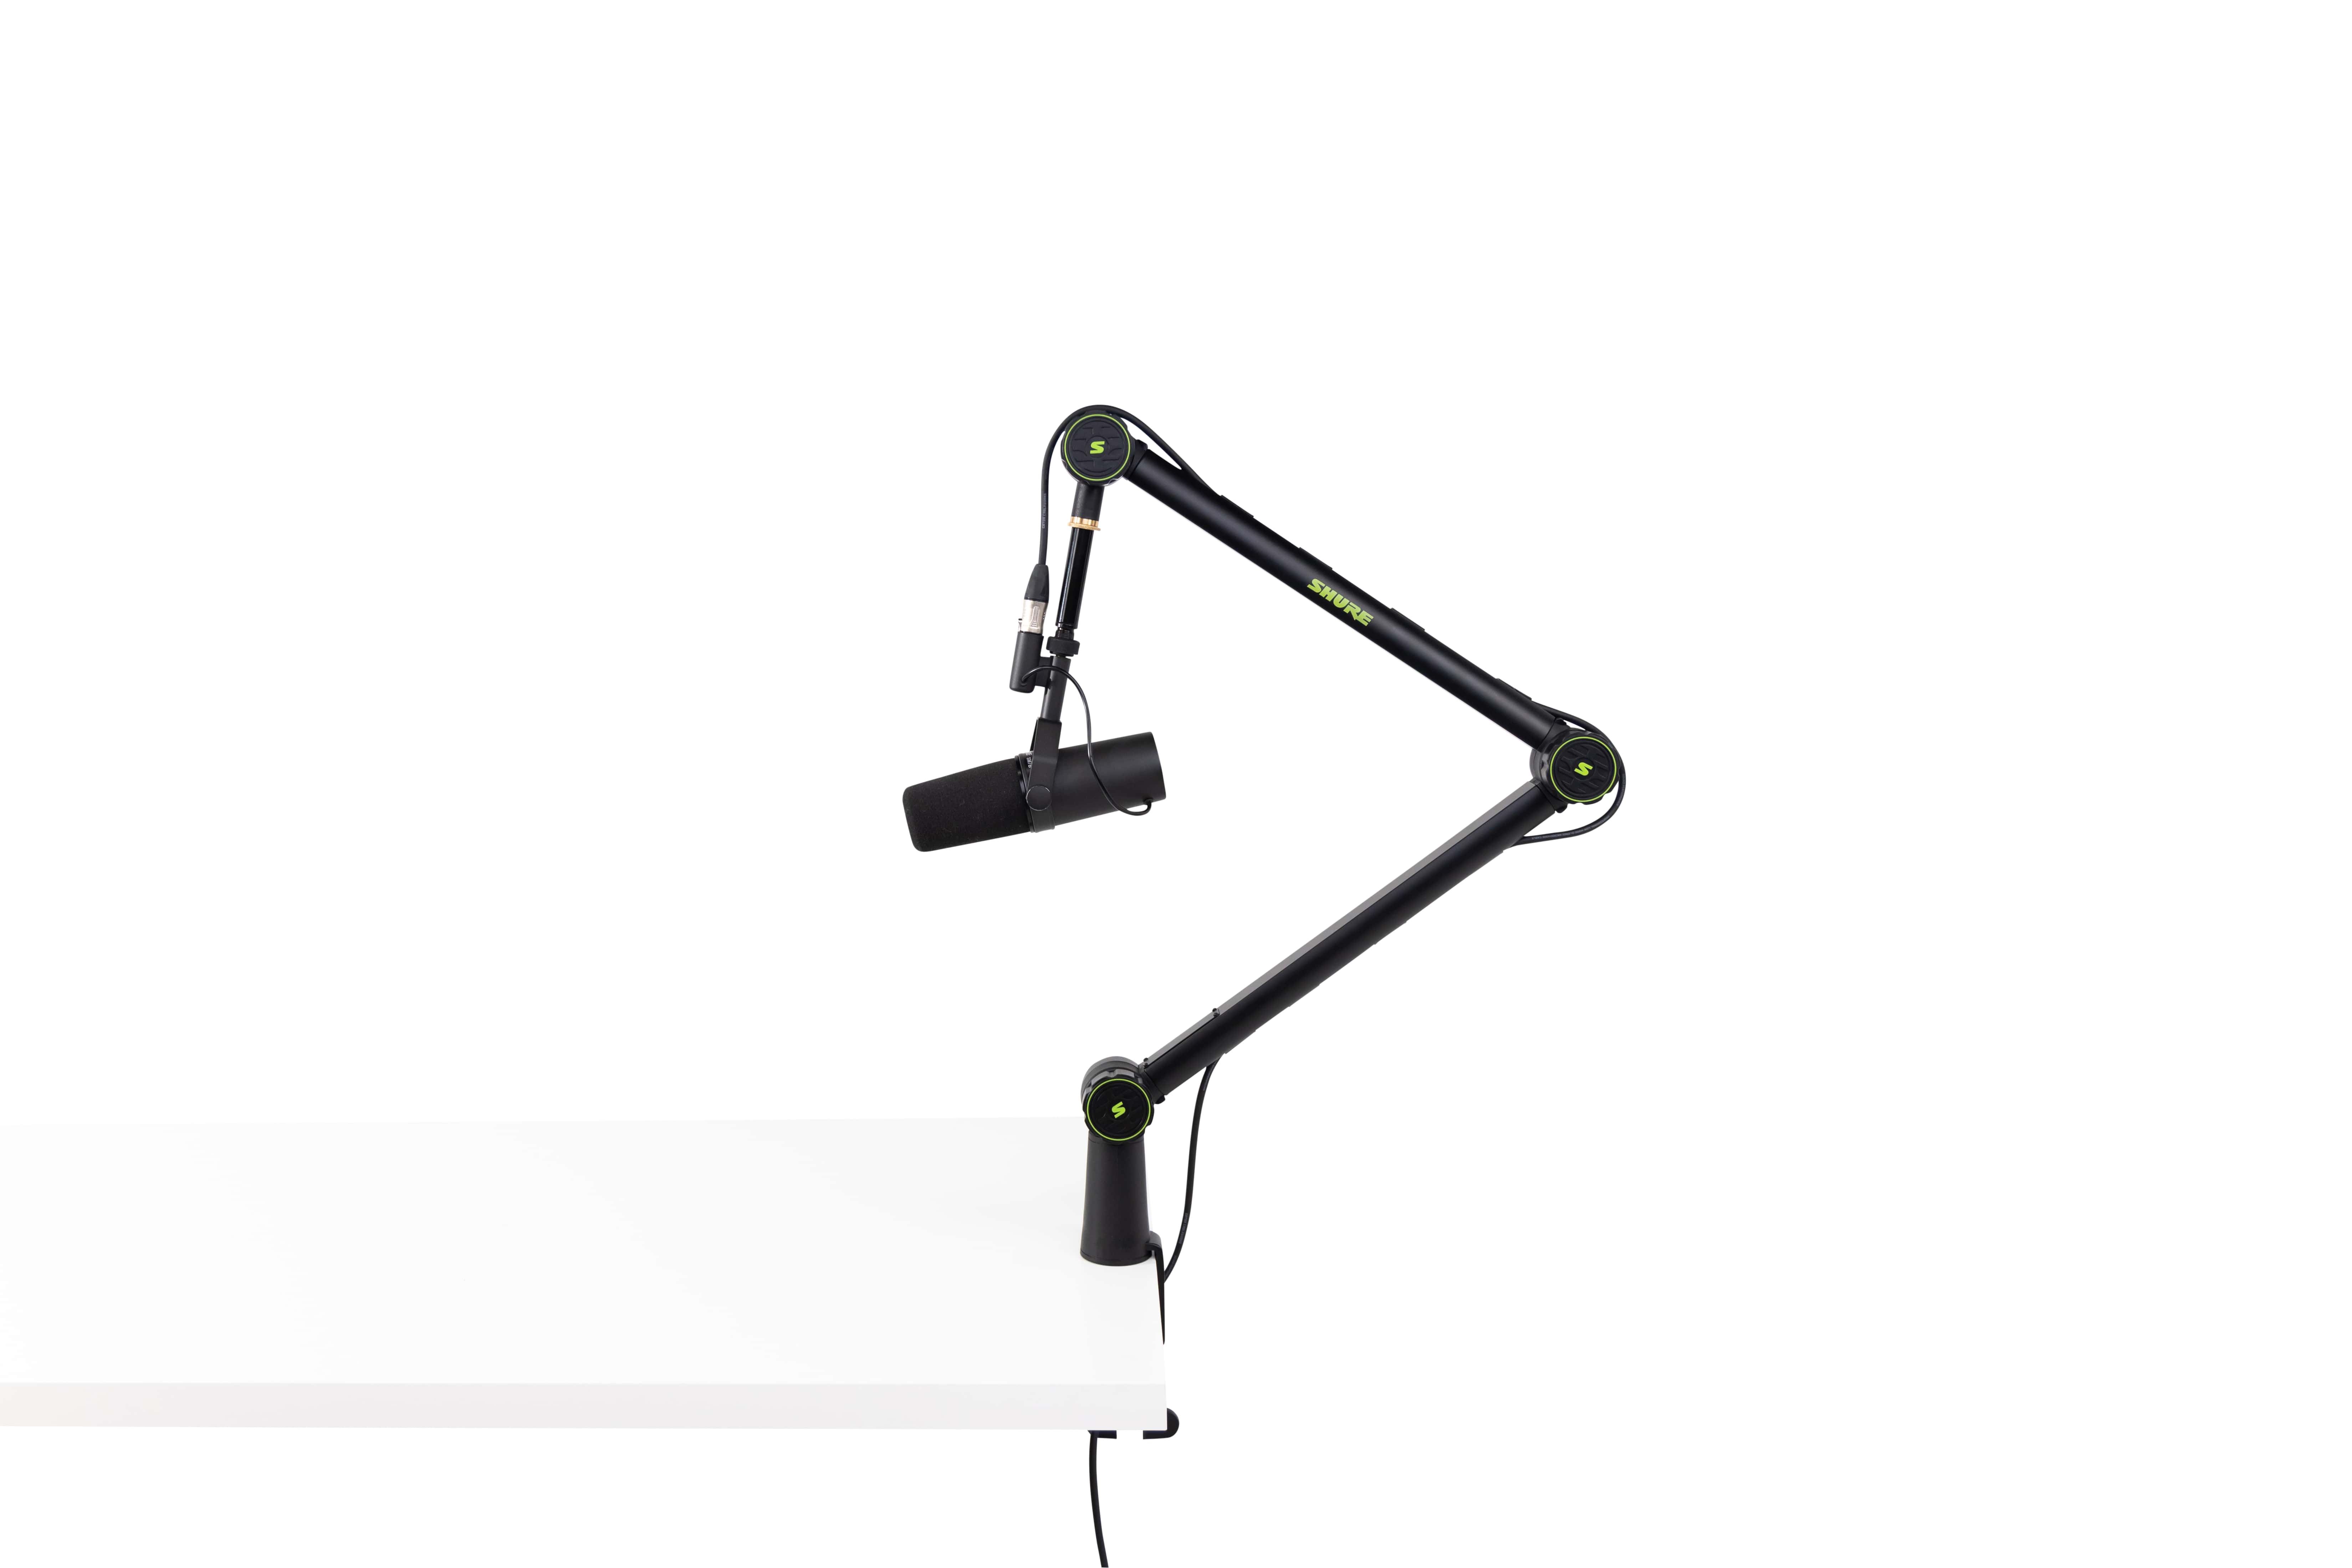 Gator Frameworks Bras Articule A Pince Deluxe Pour Micro - Microphone stand - Variation 3